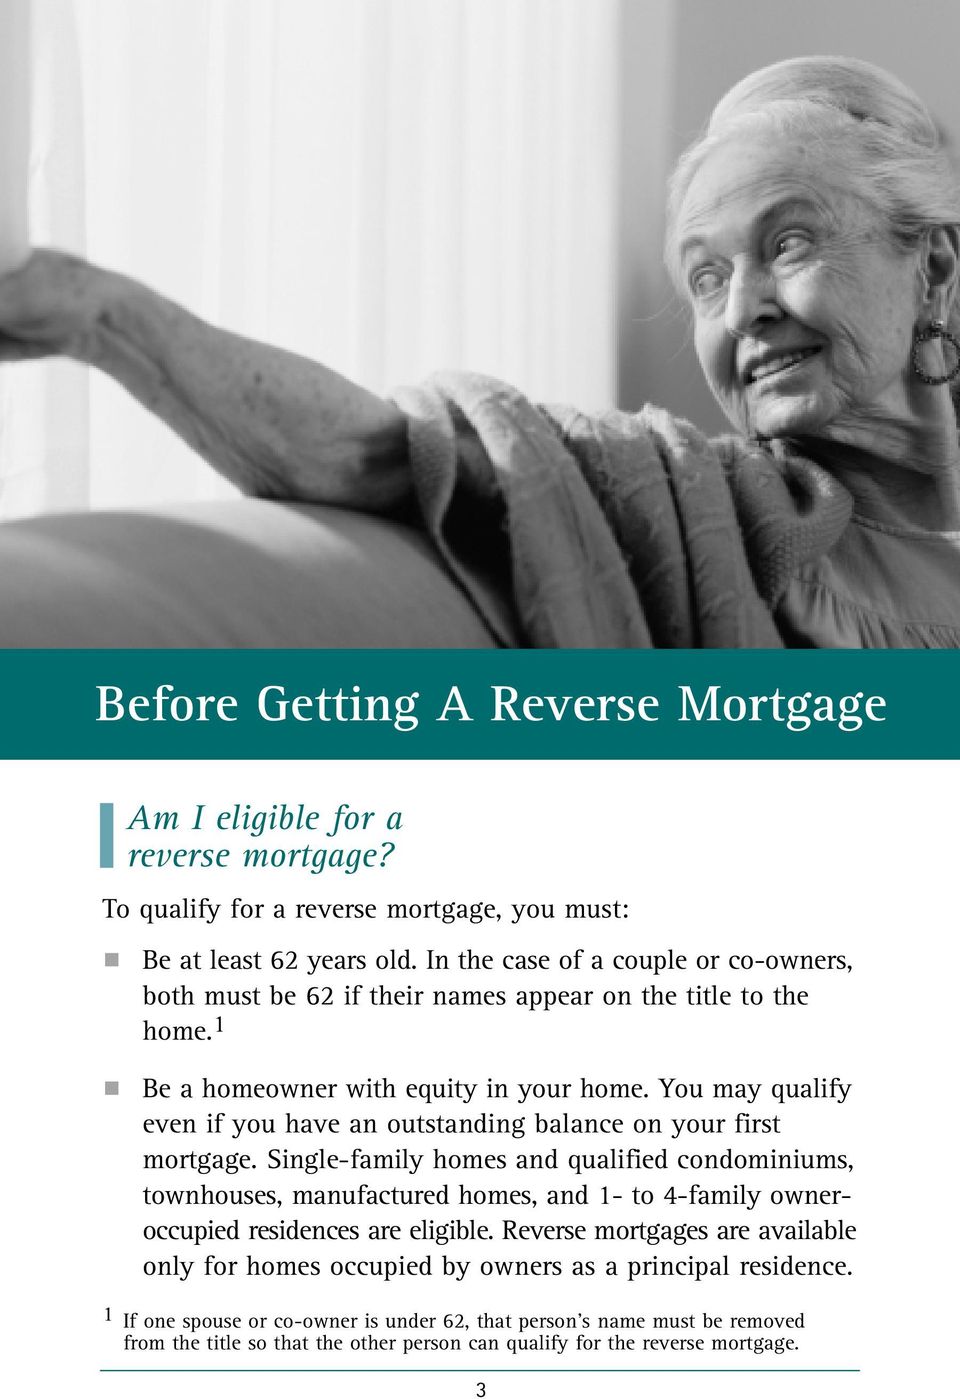 You may qualify even if you have an outstanding balance on your first mortgage.